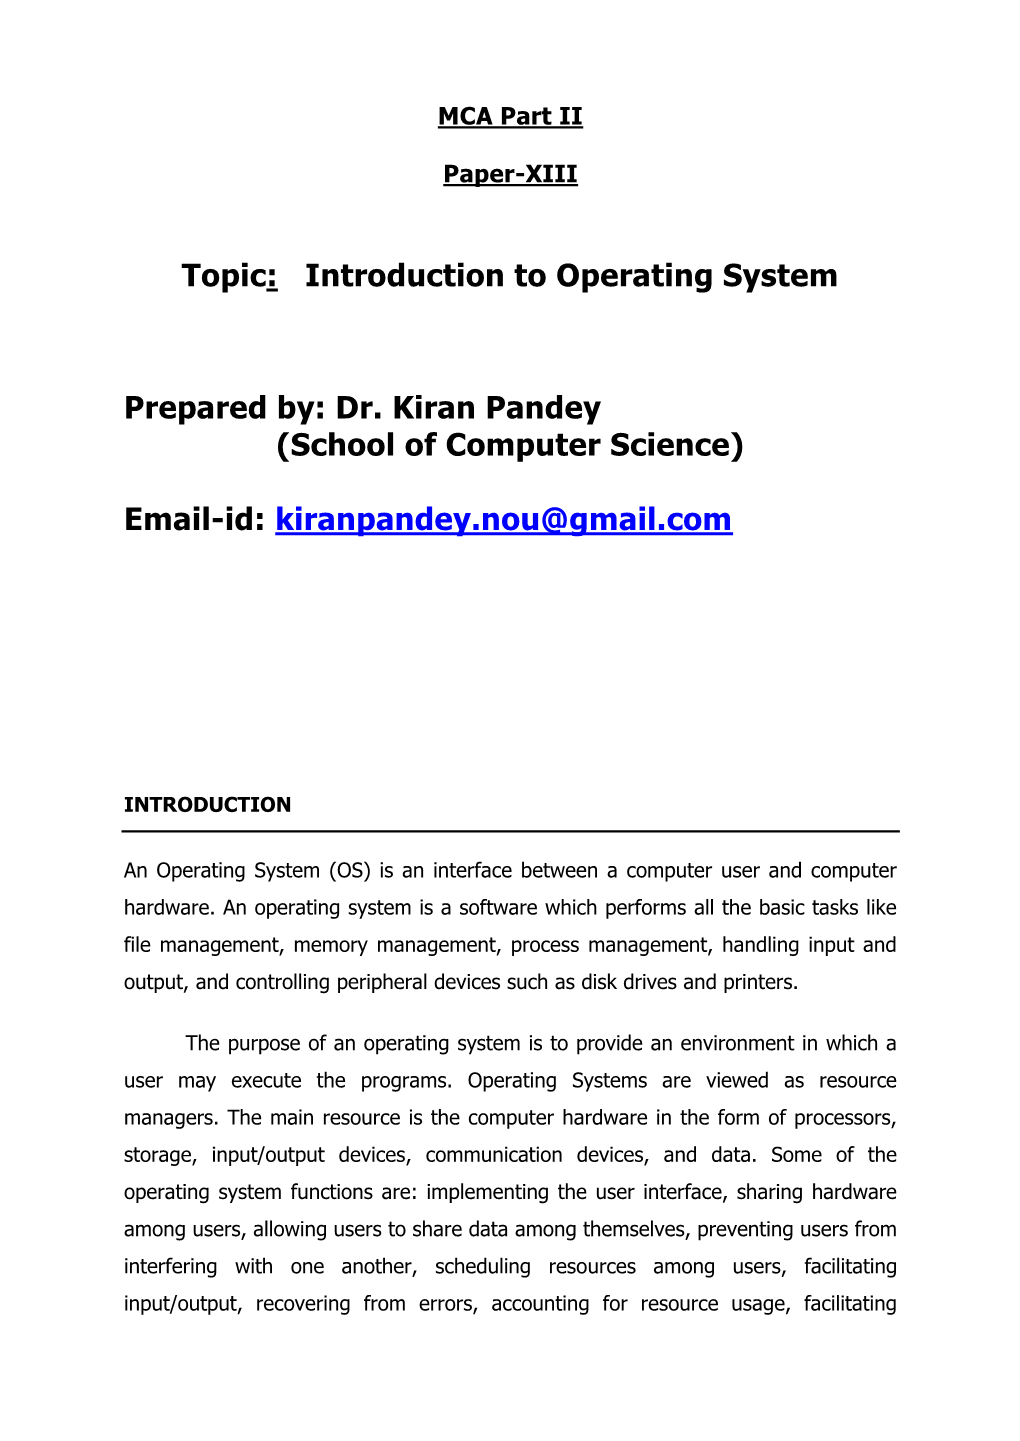 Introduction to Operating System Prepared By